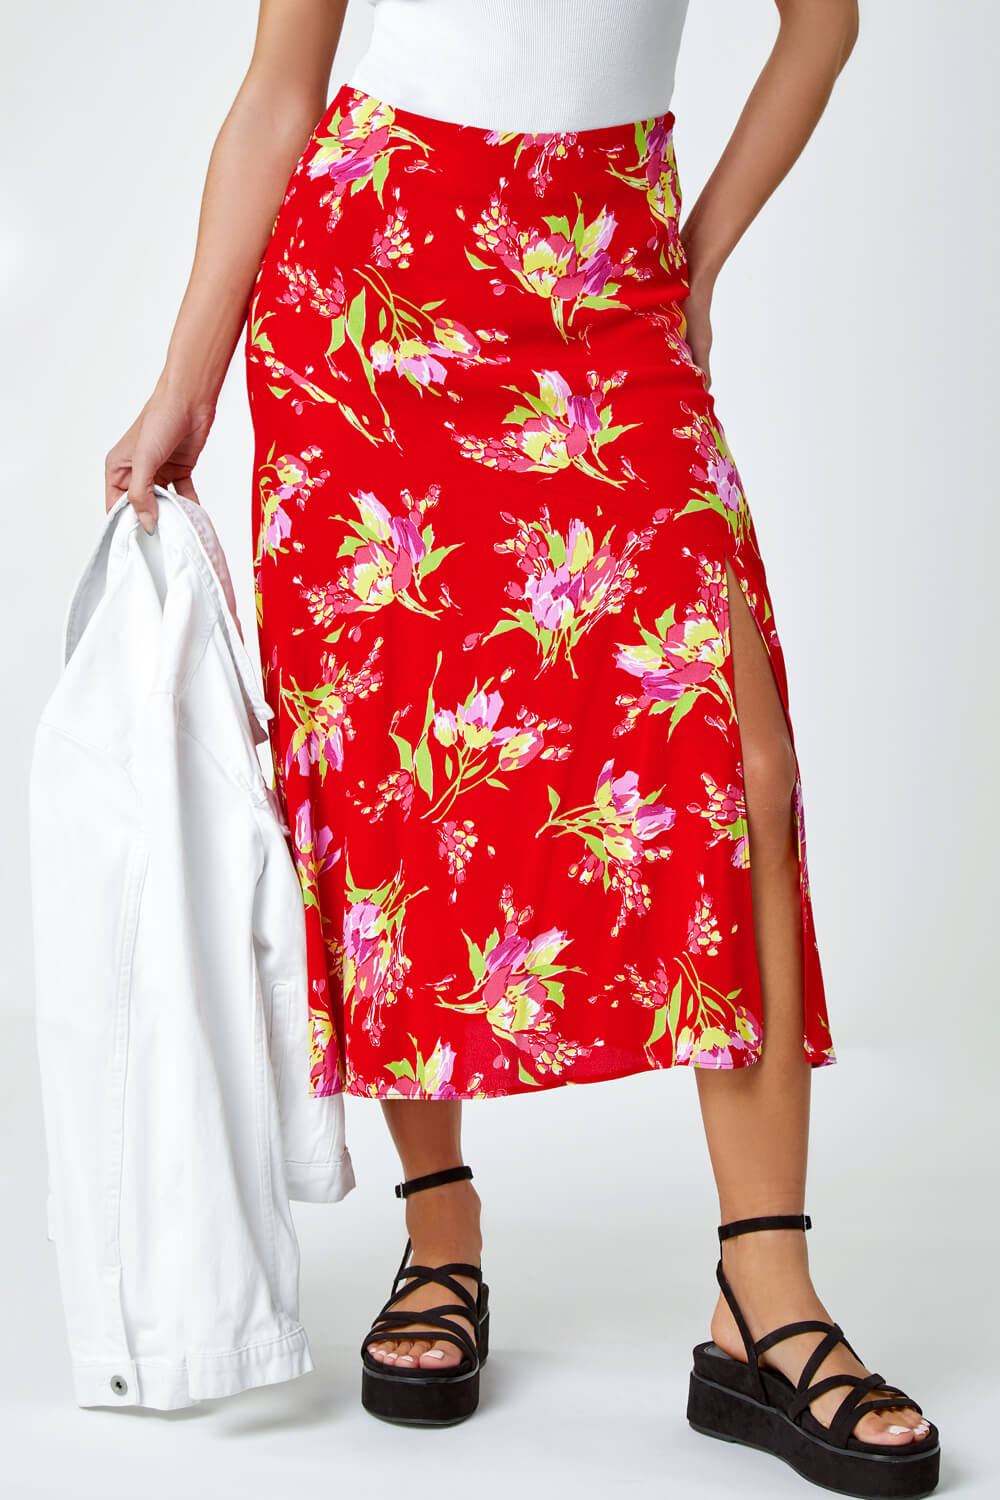 Red Floral Asymmetric Frill Midi Skirt, Image 3 of 5